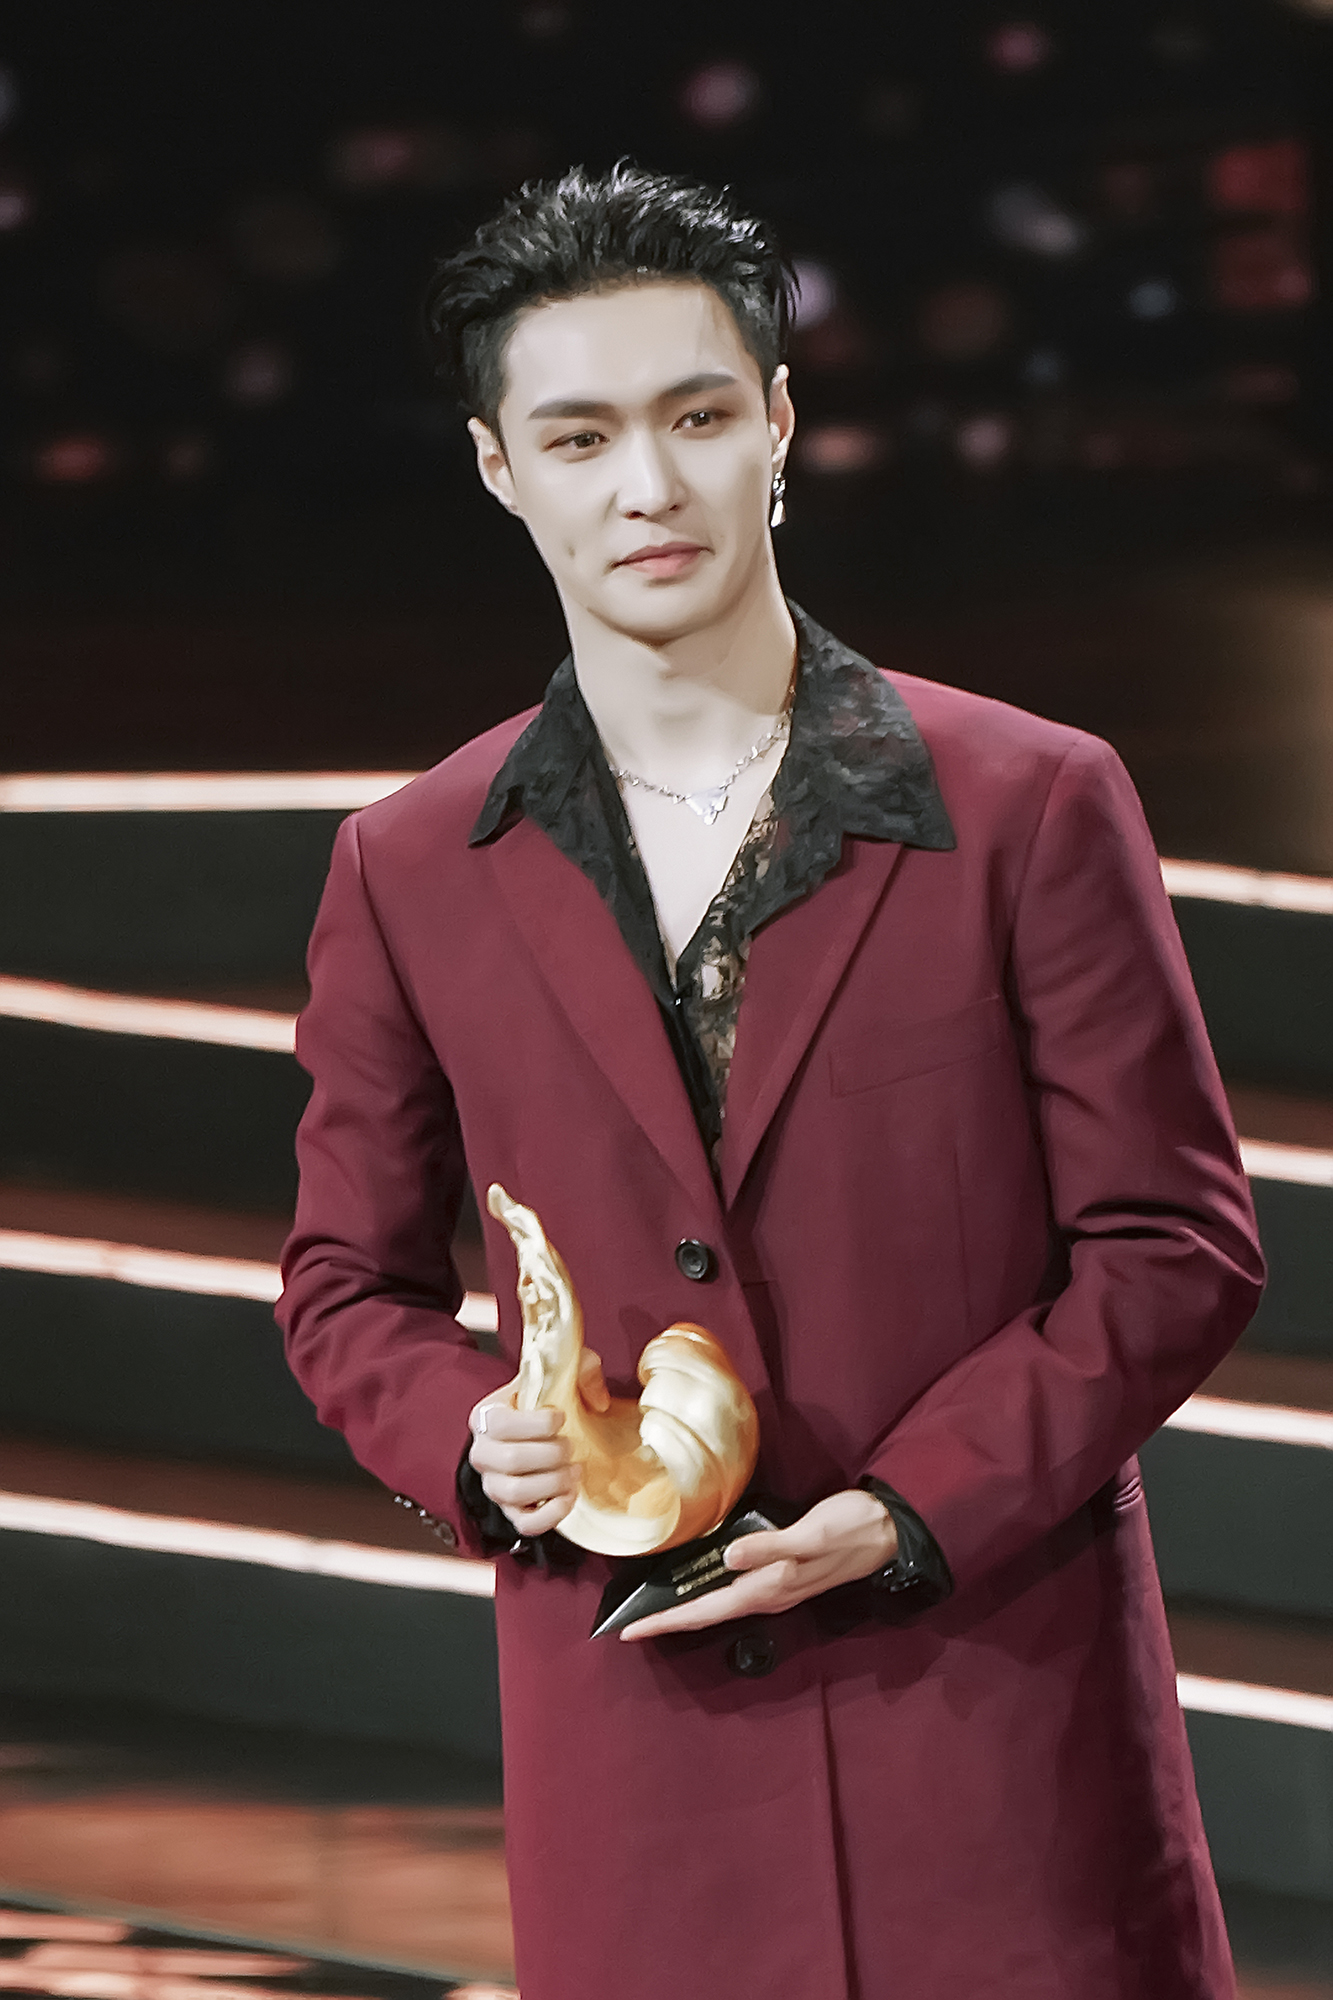 EXO Lay (a member of SM Entertainment) has swept up various awards ceremonies in China in the new year and is a hot topic.Lay attended the 2019 Weibo Night (2019) held at the Beijing Water Cube on January 11 (local time), won the Best Producer of the Year Award and the Nam Shin of the Year award, making him an overwhelming local popularity once again.The 2019 Weibo Night, which marks its 10th anniversary, is an awards ceremony hosted by Chinas largest SNS Weibo. It invites a star who has been hot for a year. Lay has been selected as a winner in 2019 for his outstanding production skills, visuals, popularity, and topicality.In addition, Lay received the All-Star of the Year award at the 2019 ByteDance Year Festival (2019) held at the Beijing Cadillac Arena on January 8 (local time), and the ending stage was spectacularly decorated with the hit song NAMANA (Namana), which received a heated response from more than 5,000 viewers who visited the scene.The awards ceremony was hosted by ByteDance, which is serving video-sharing application TikTok, and News Application Jinrtouo, and was awarded with a selection of outstanding people and contents that are outstanding in the popular culture world based on big data in the ByteDance platform.The netizens are responding to I congratulate you so much, I am the best, I am proud, I want to see.As a result, Lay was three-time king of 2019 Tencent Music Entertainment Awards held in December last year, followed by the 2nd prize of 2020 Aichi Night of the Shout, the 2nd prize of 2019 Weibo Night and the 2019 ByteDance Yearbook award, total 8 gold medals were recorded at the China end ceremony, proving explosive popularity and high status in the local area.iMBC  Photos SM